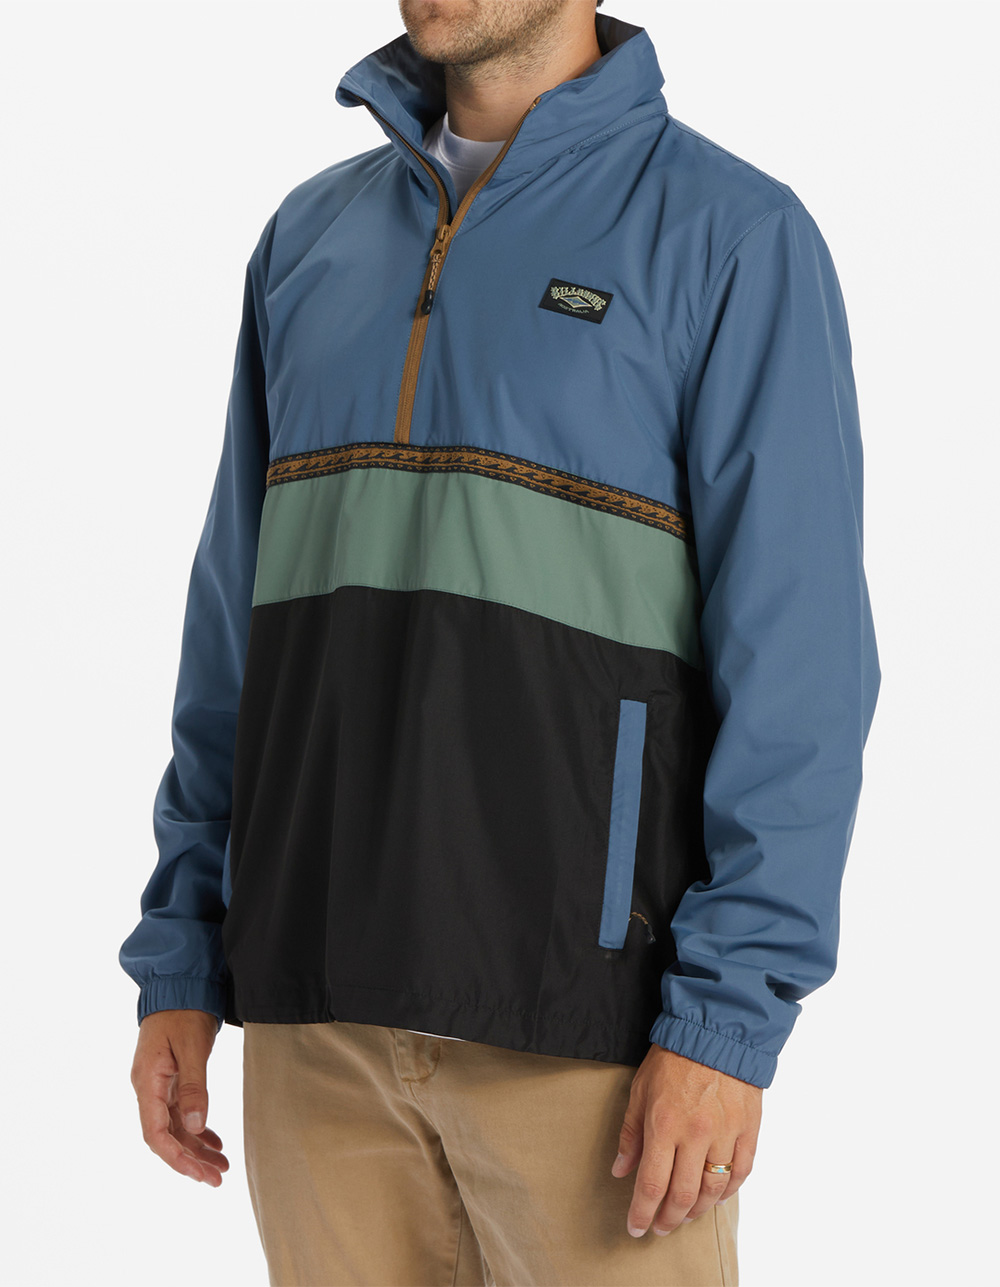 Wind Swell - Anorak Jacket for Men